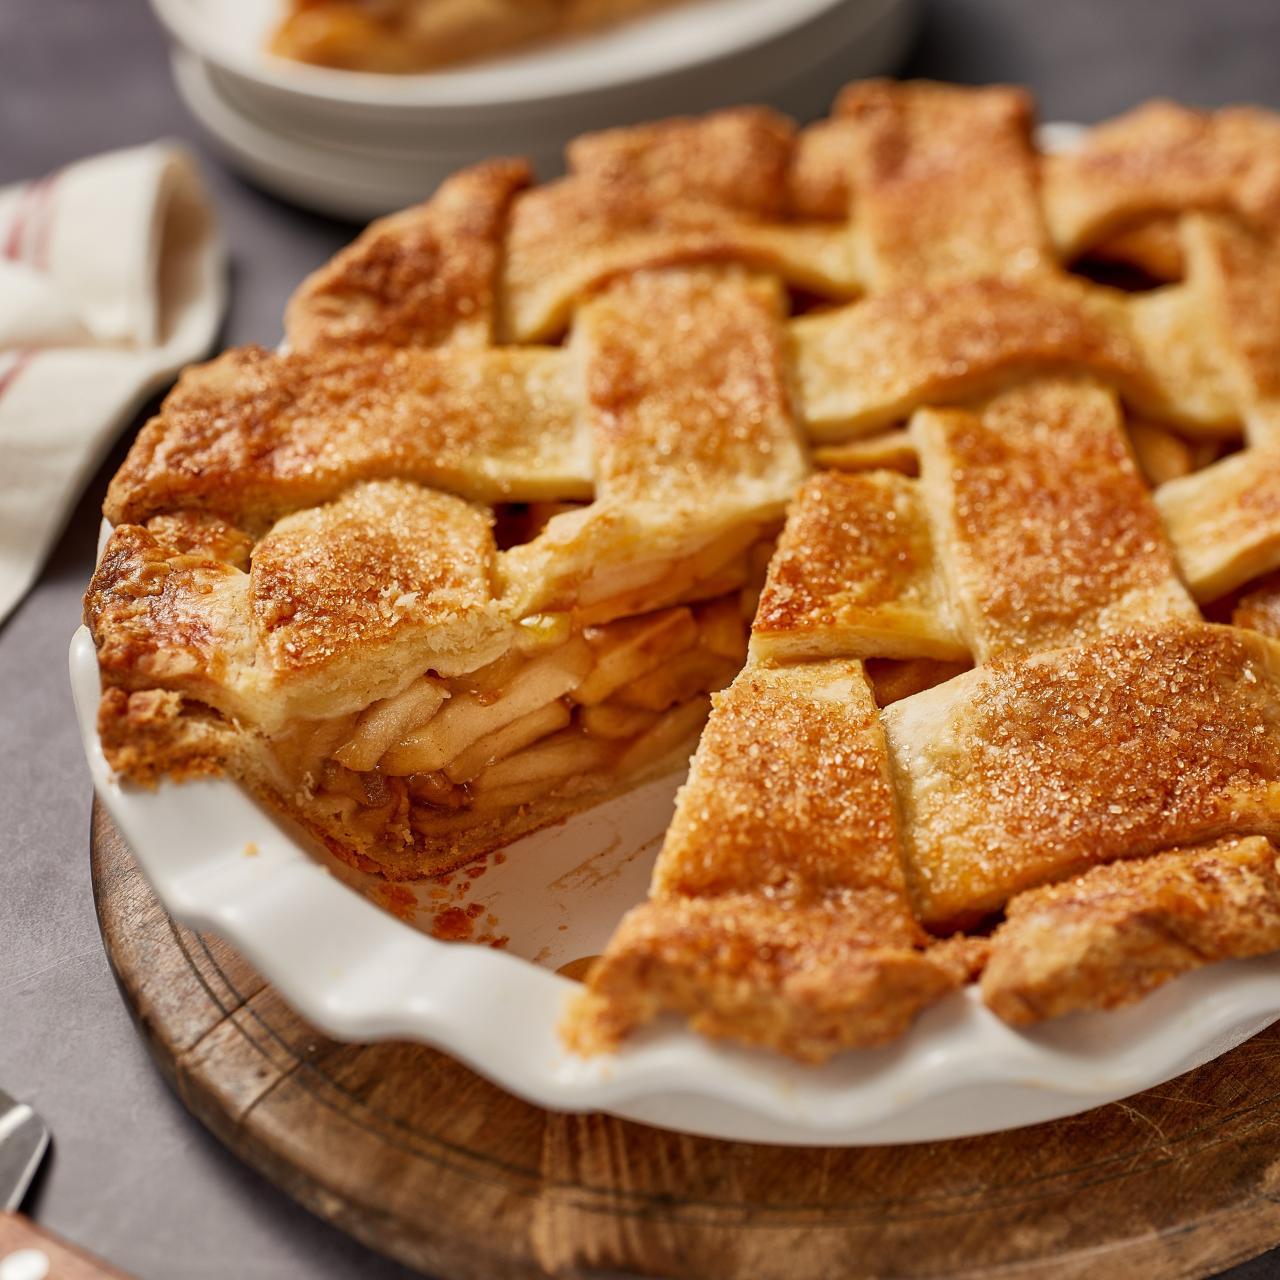 Best Old Fashioned Apple Pie Recipe - The Gracious Wife